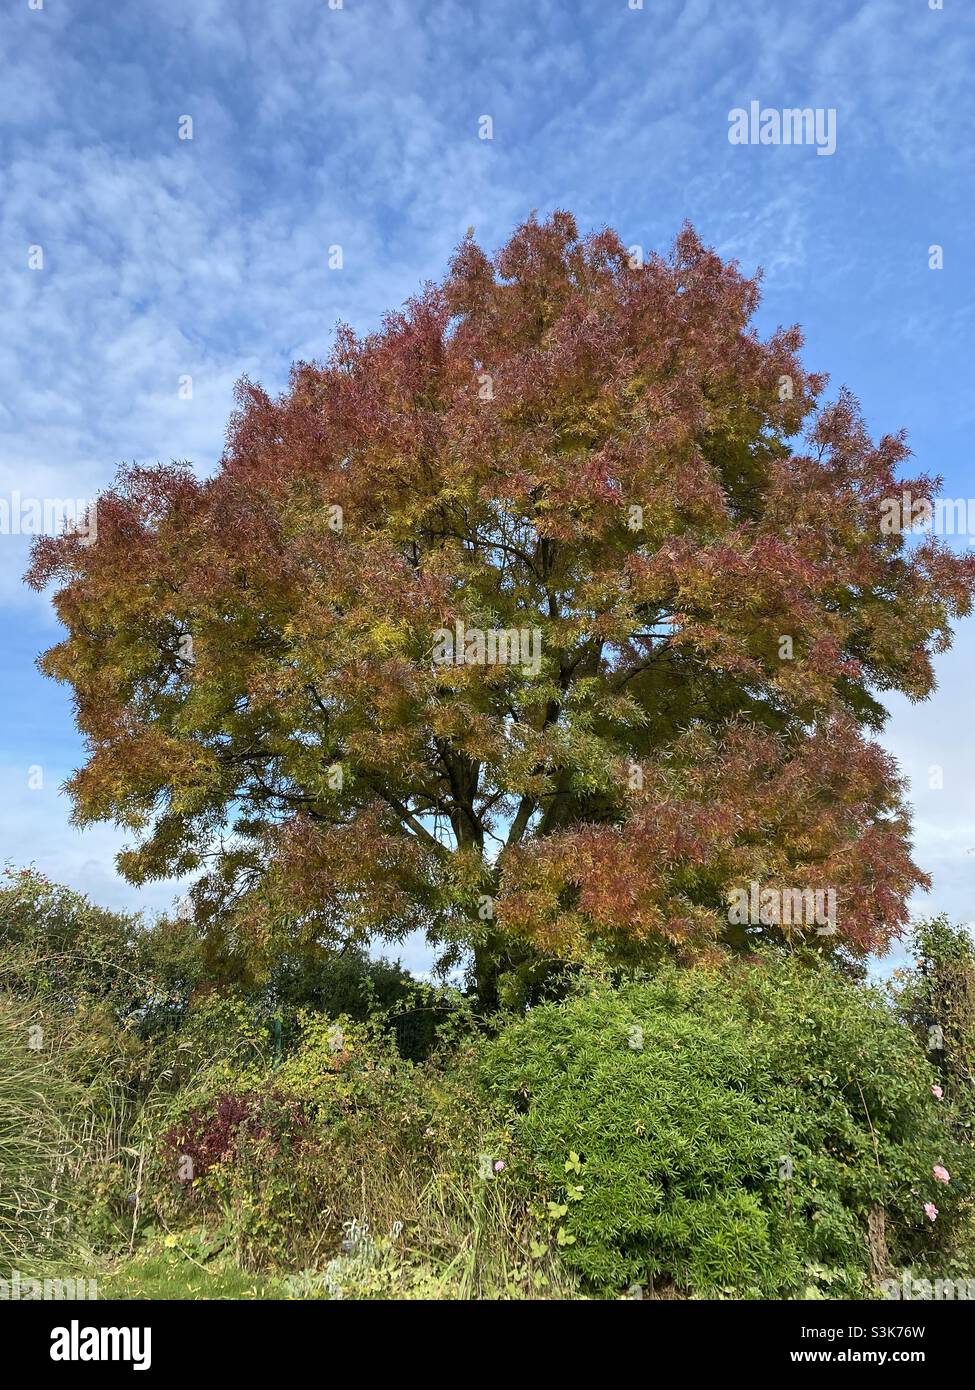 A large Claret Ash tree in the garden. Stock Photo